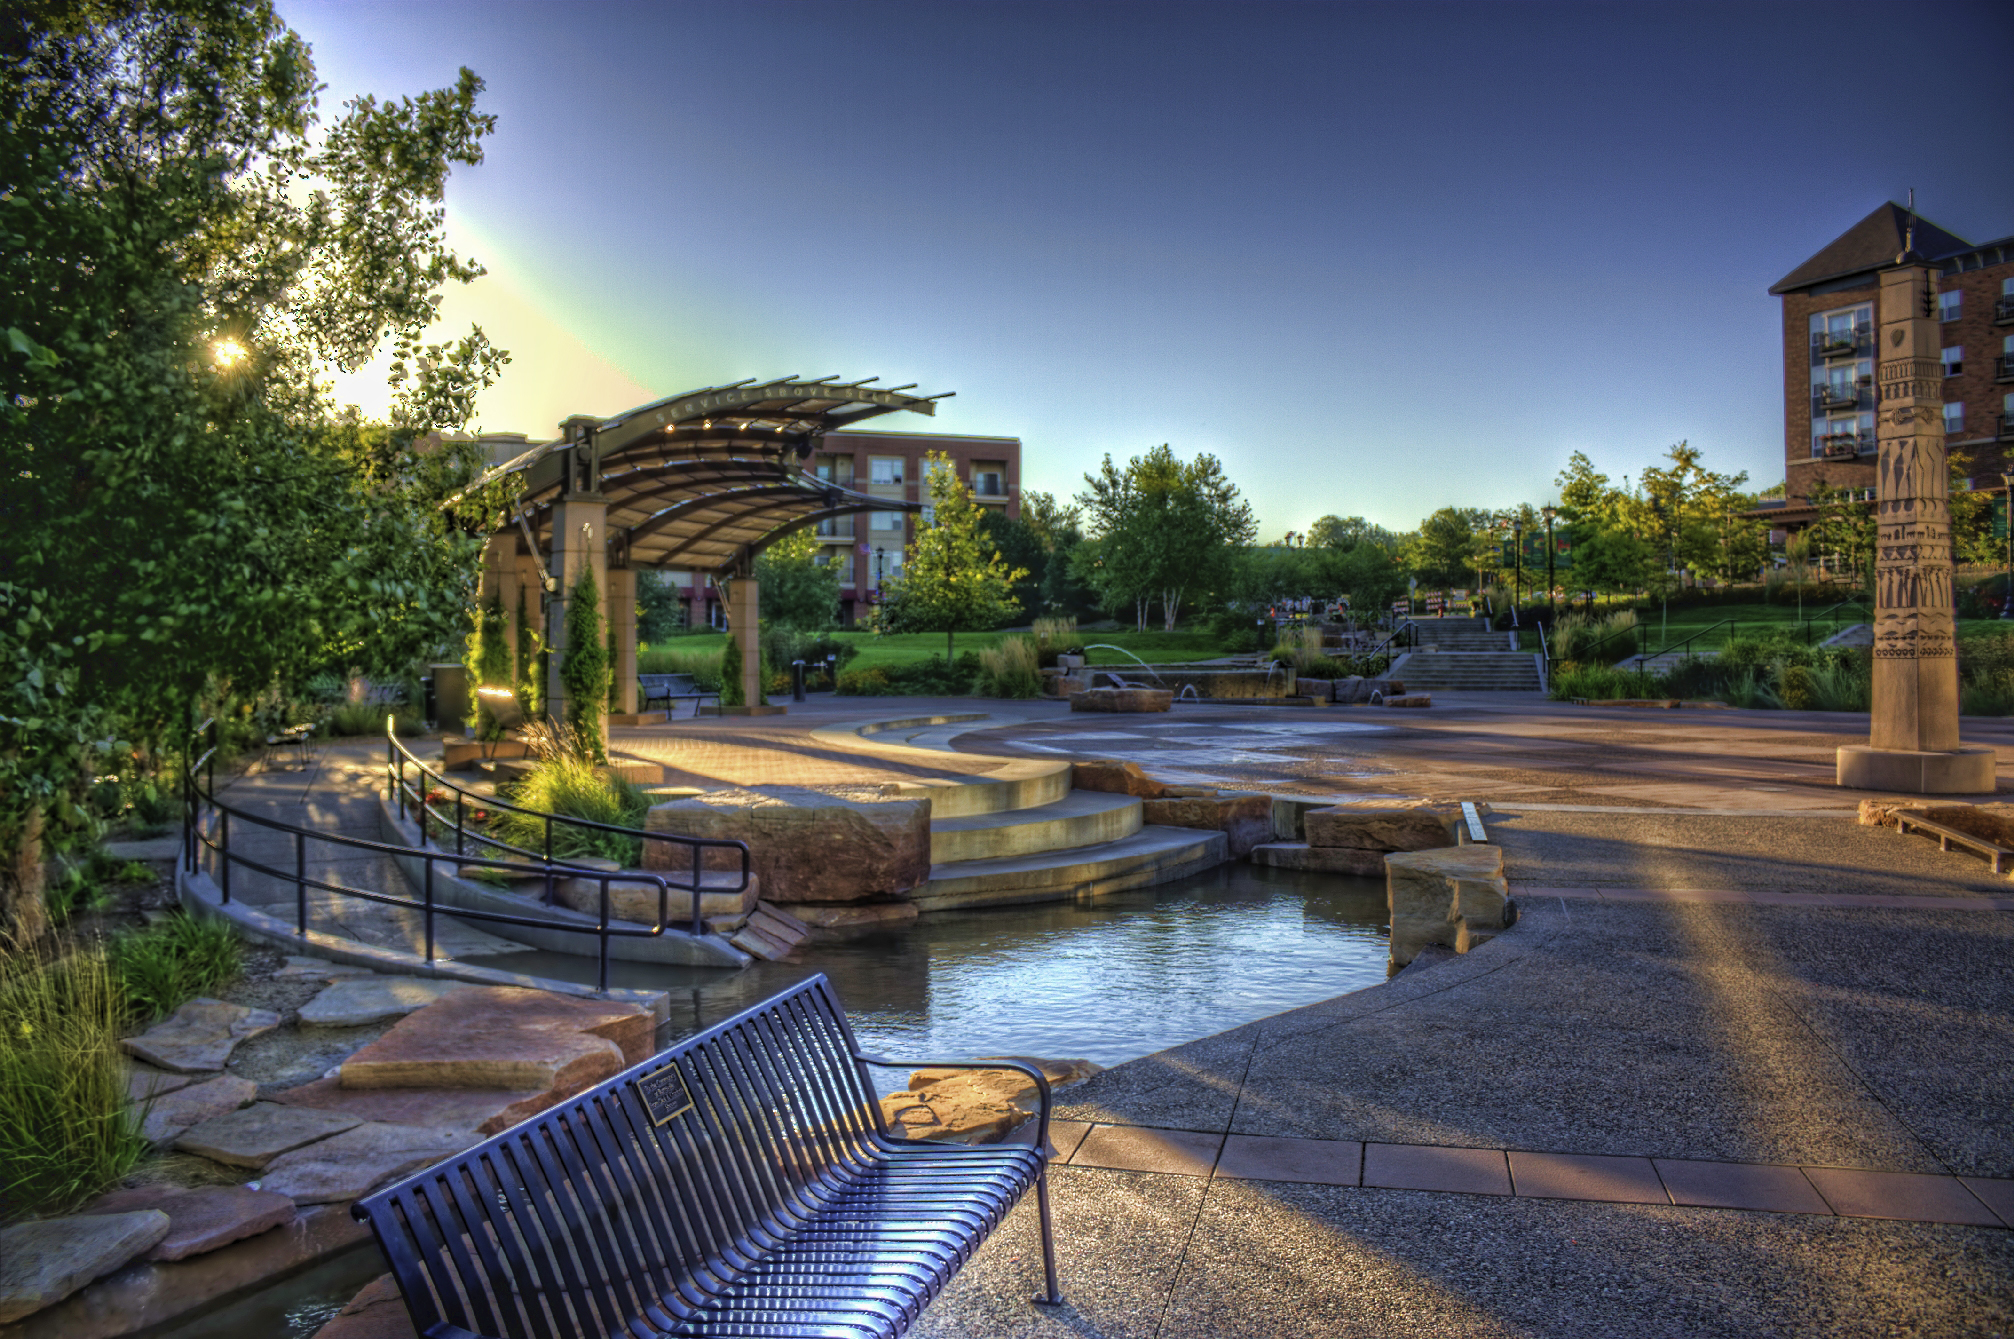 Nicollet Commons Park by Nick Ortloff - CC by SA 2.0